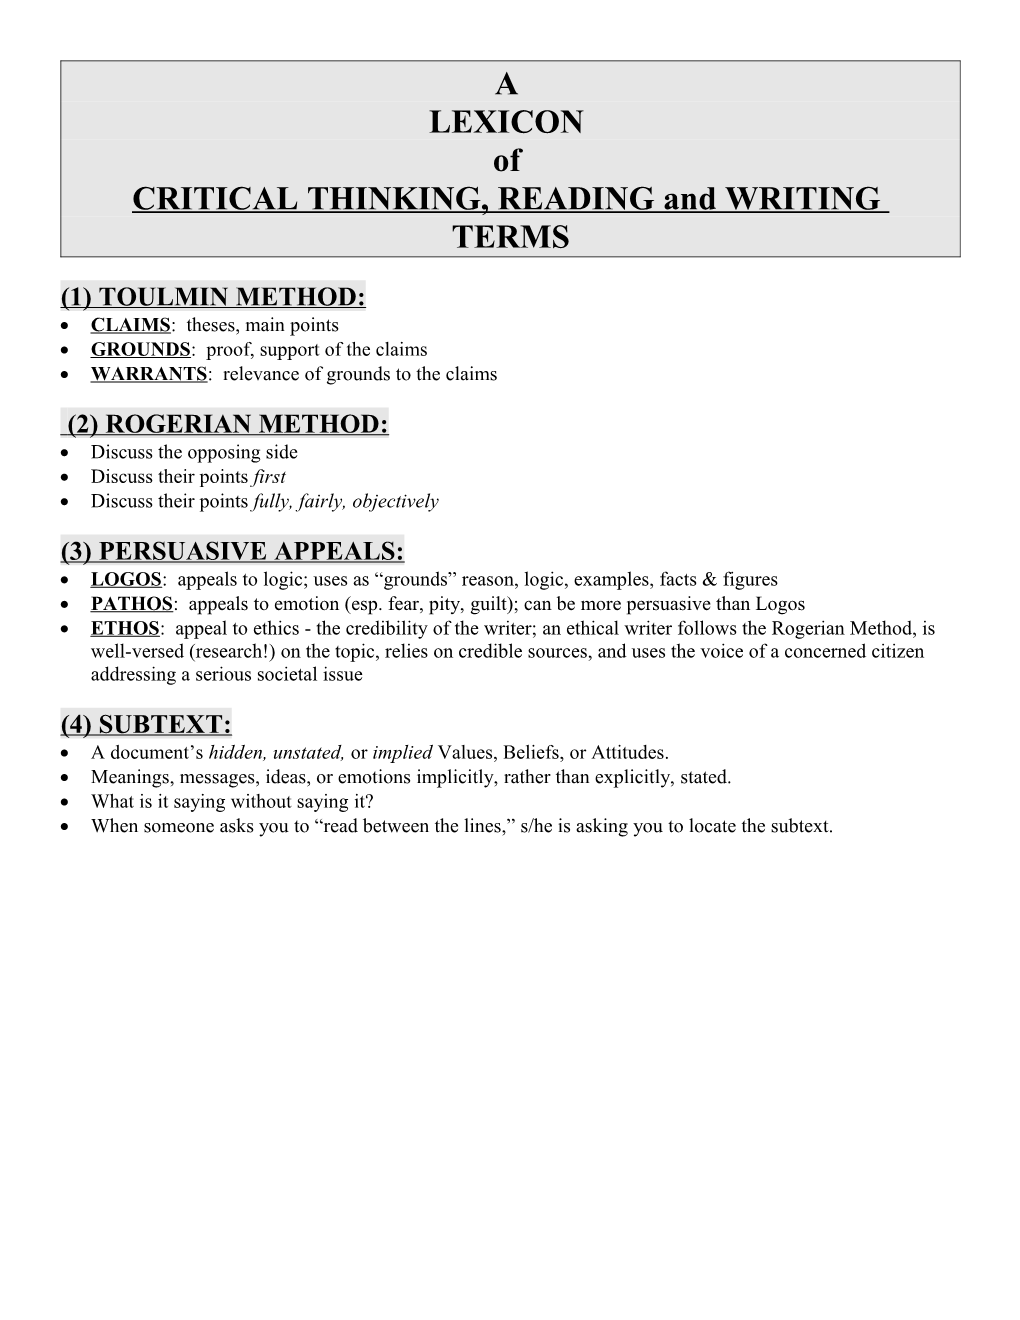 CRITICAL THINKING, READING and WRITING